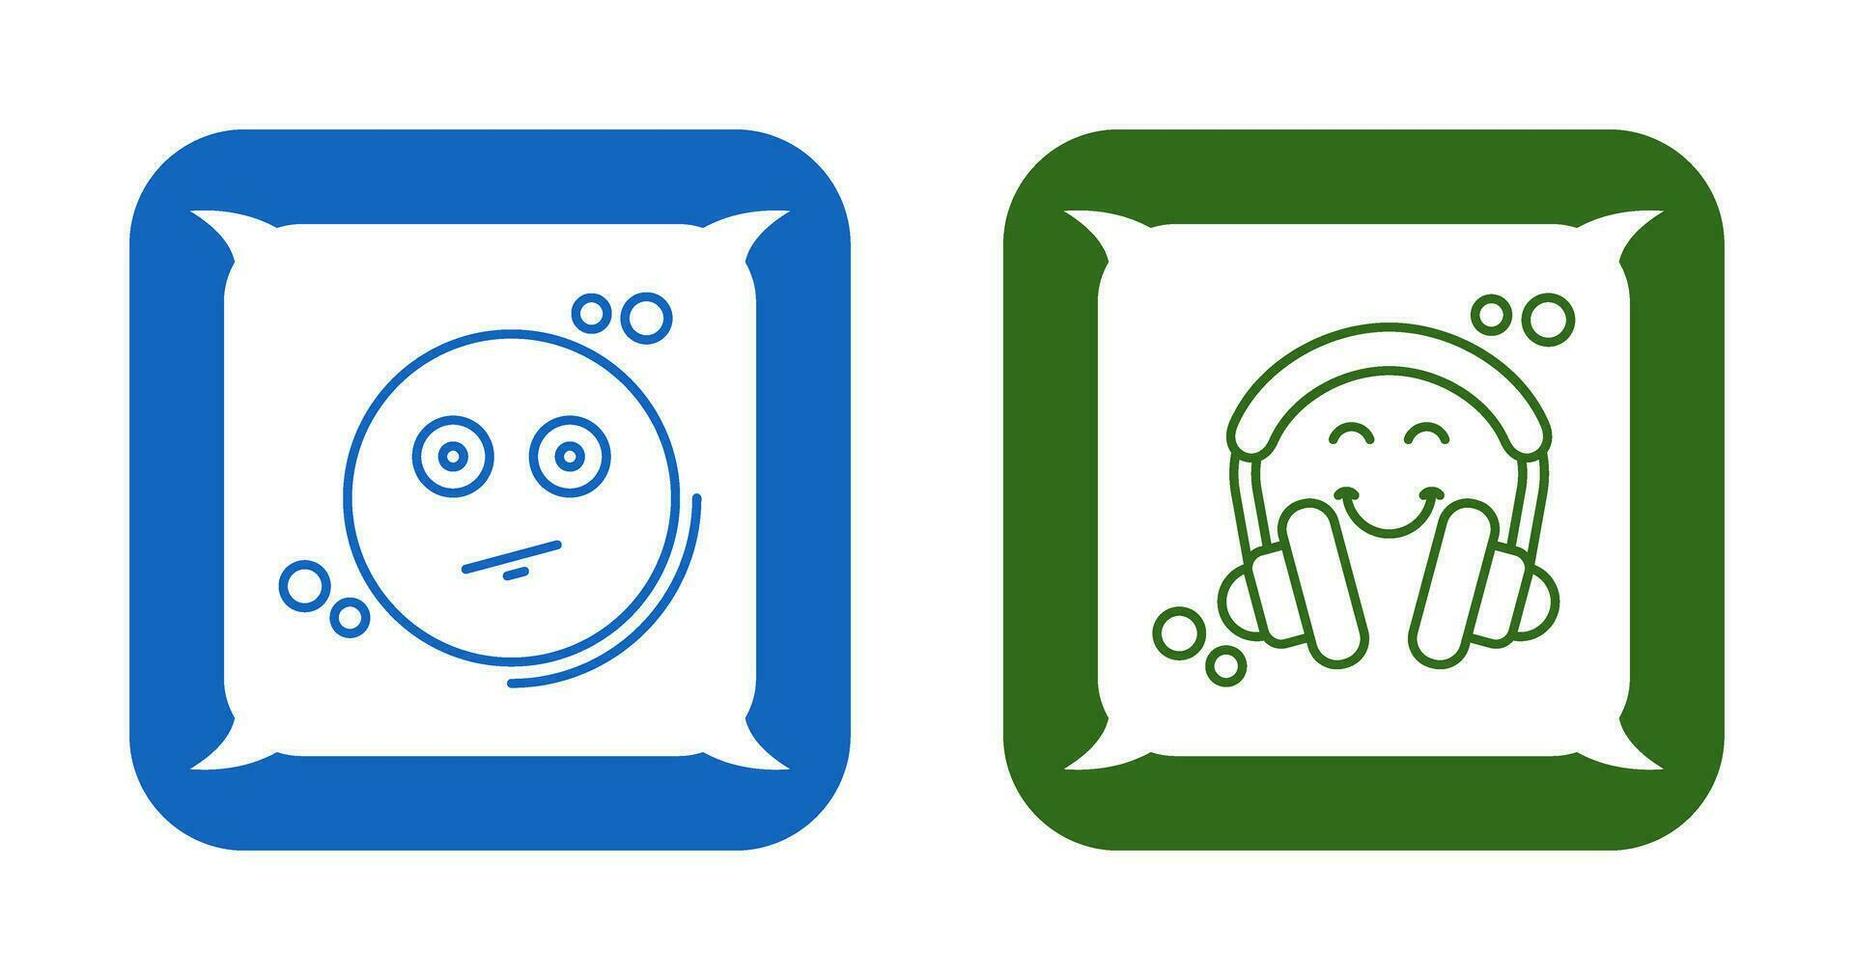 Neutral and Headphones Icon vector